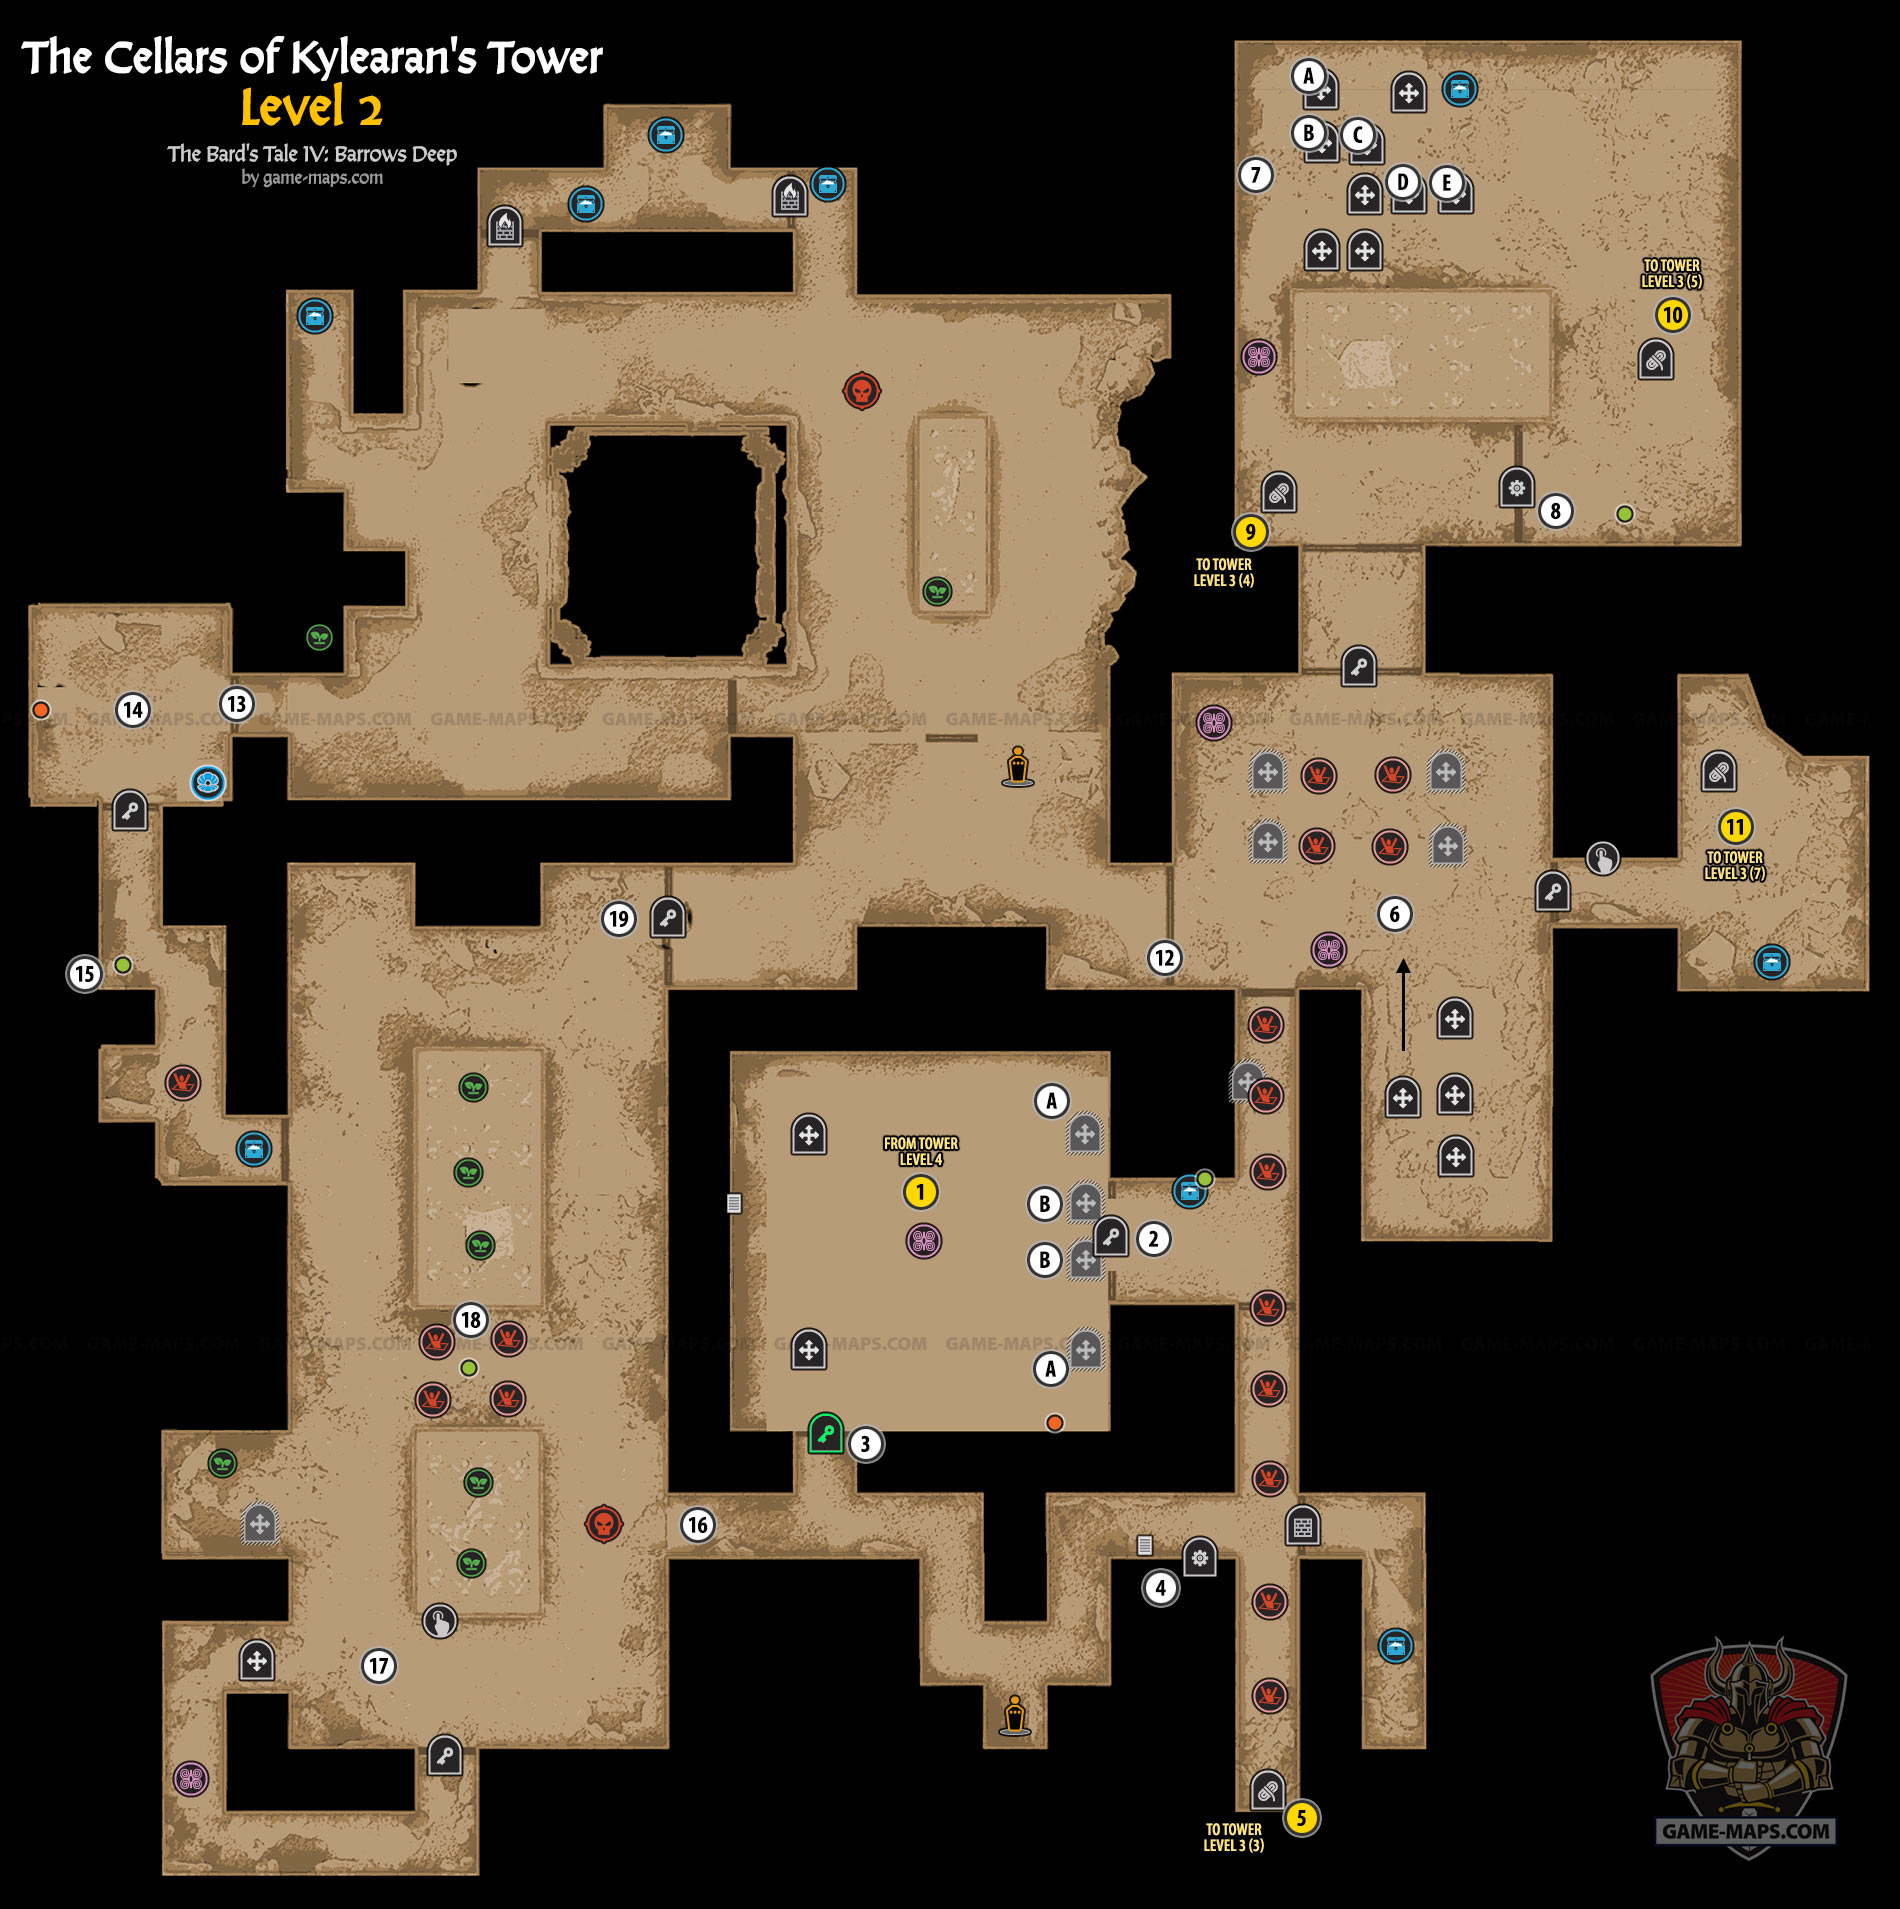 The Cellars of Kylearan's Tower Level 2